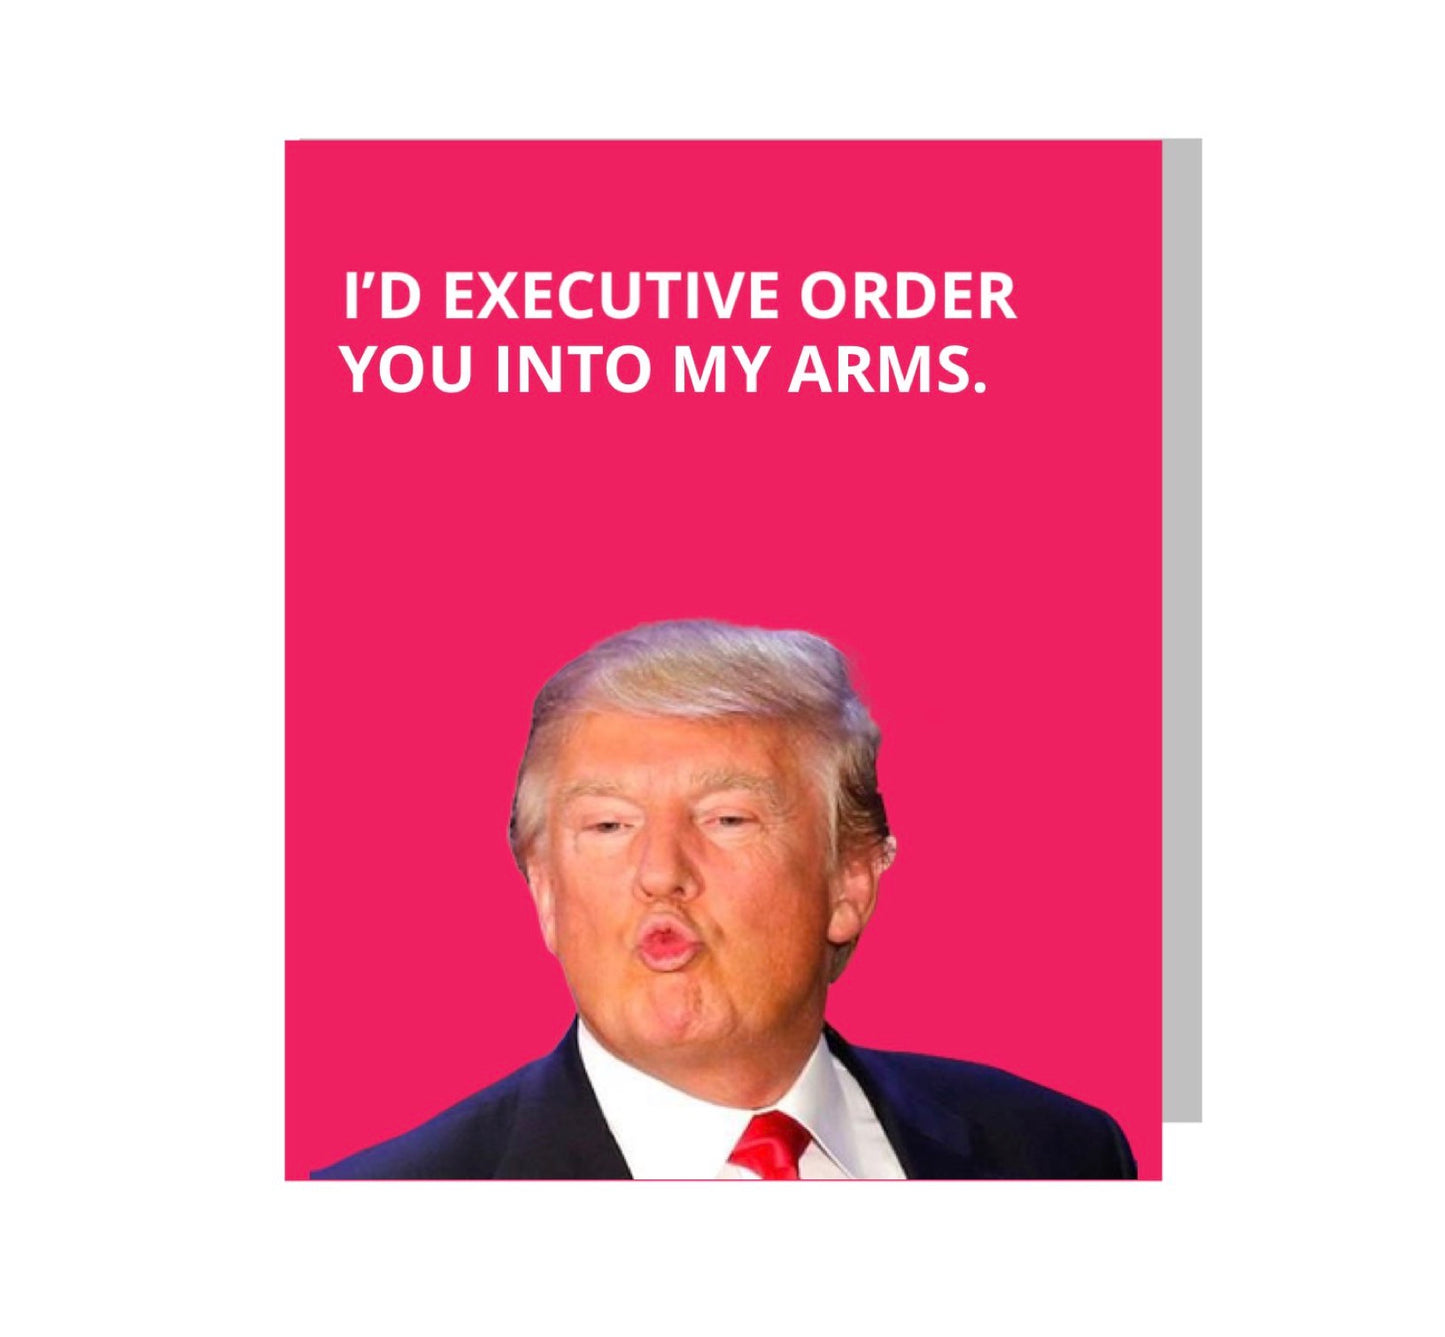 Trump Valentine's Day Greeting Card (FREE Shipping)